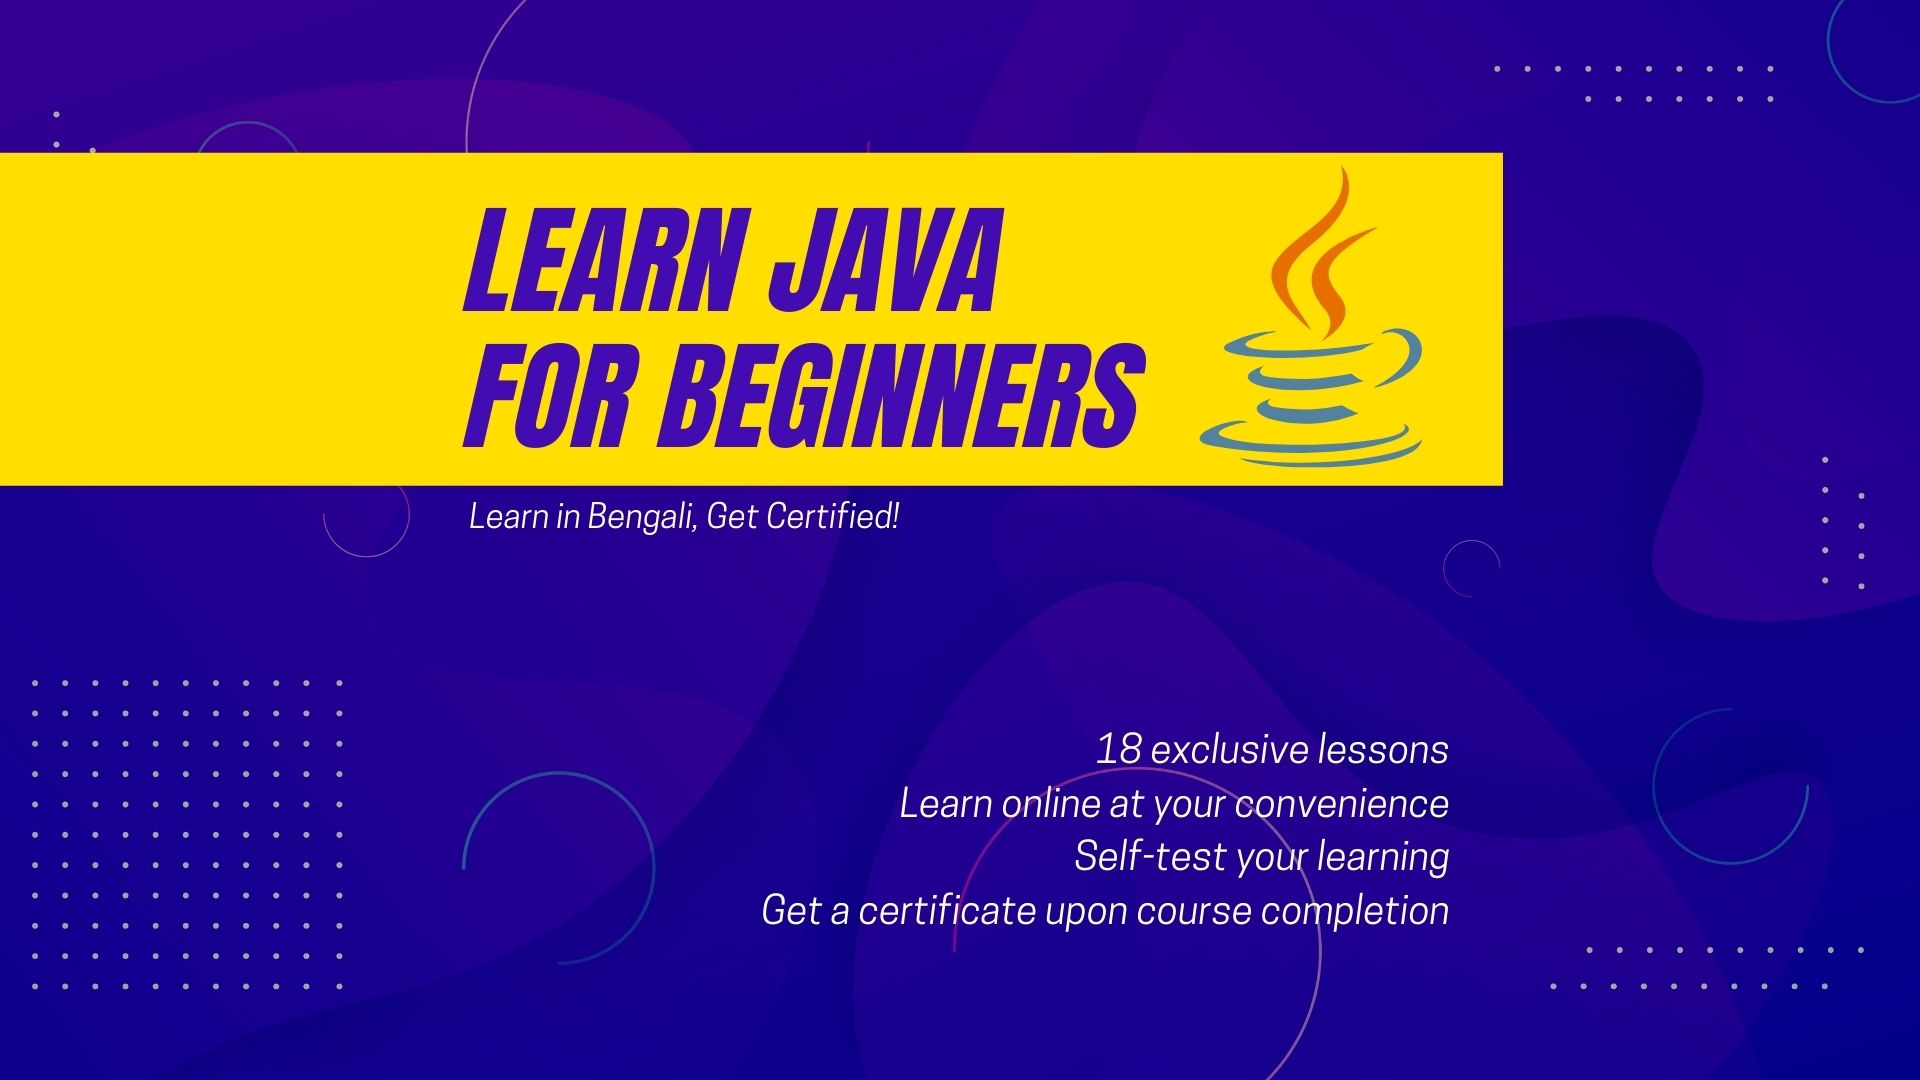 Learn Java for Beginners Course Image